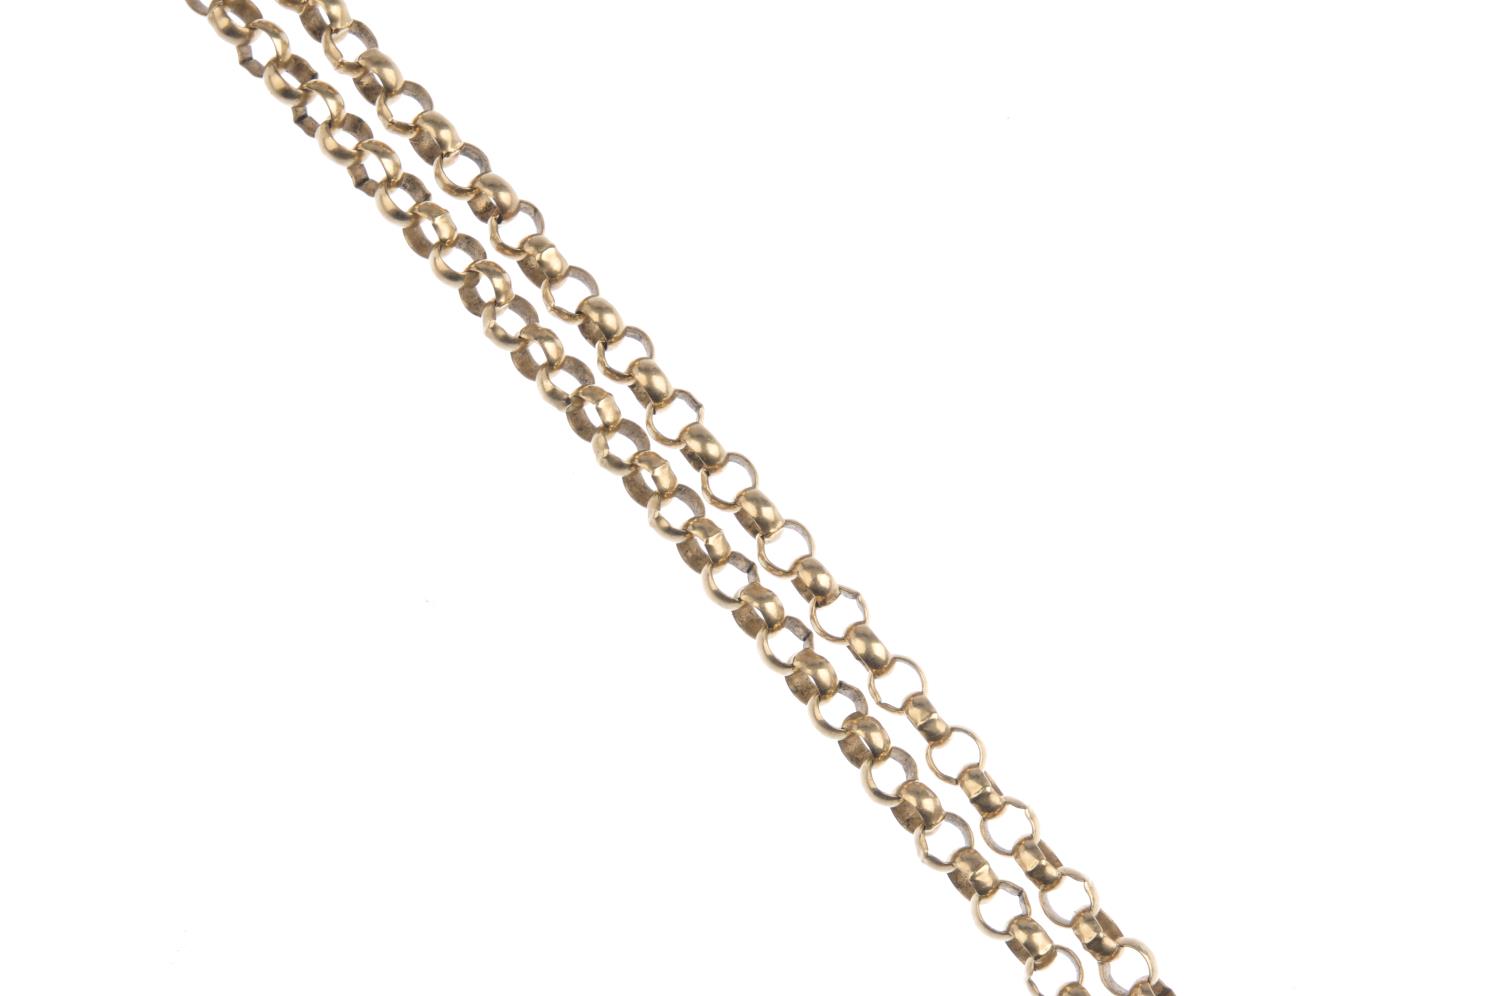 (52407) A 9ct gold pendant, with chain. Designed as a rectangular ingot bar, suspended from a - Image 3 of 3